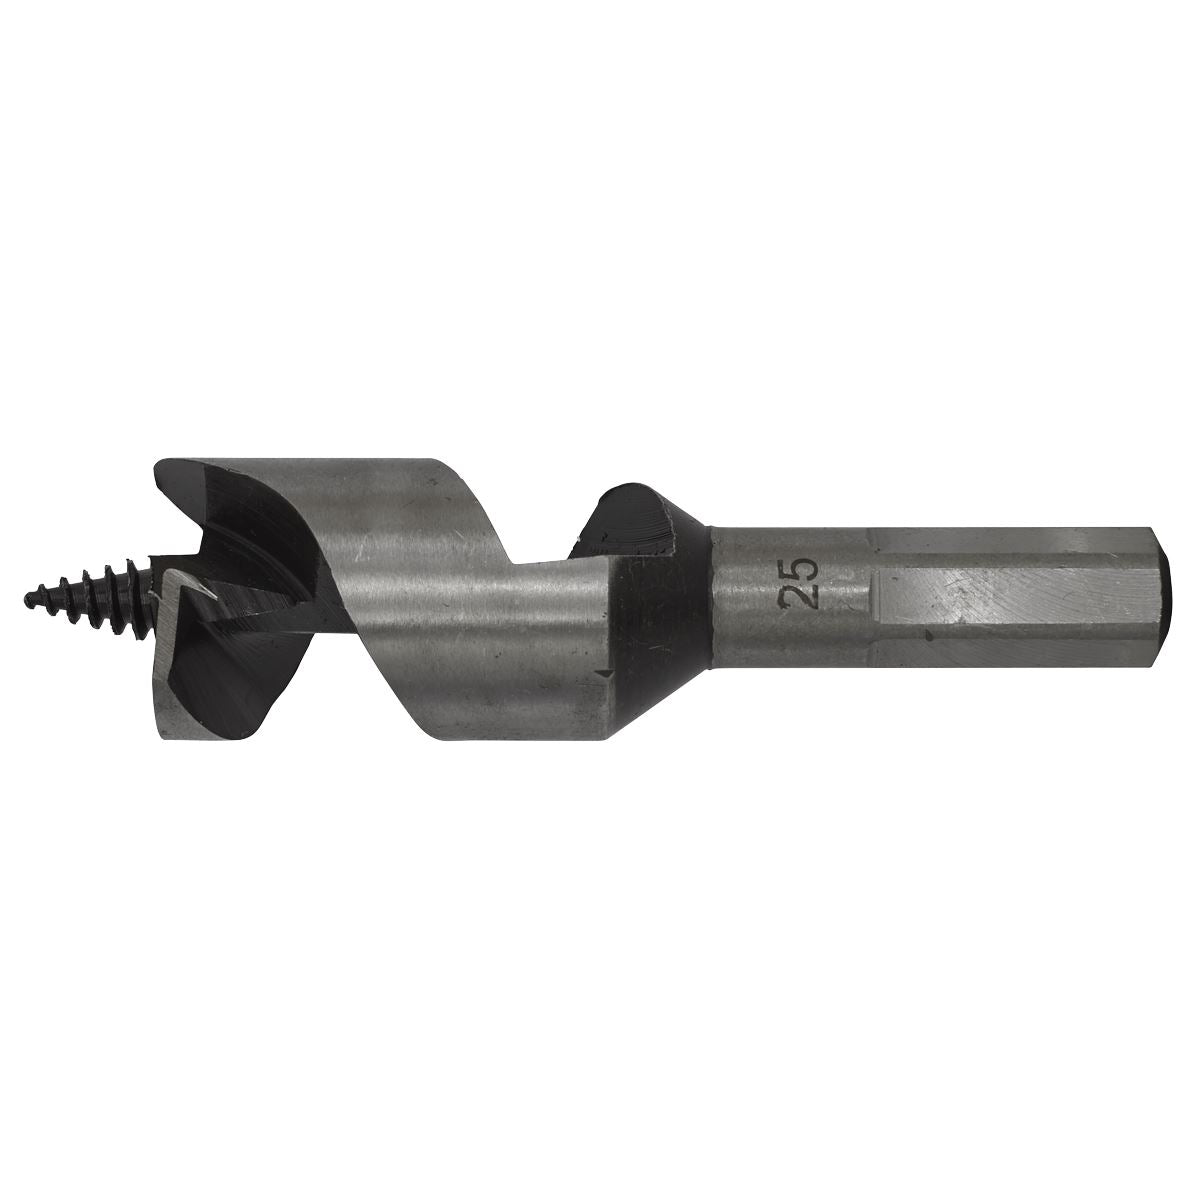 Worksafe by Sealey Auger Wood Drill Bit 25mm x 100mm